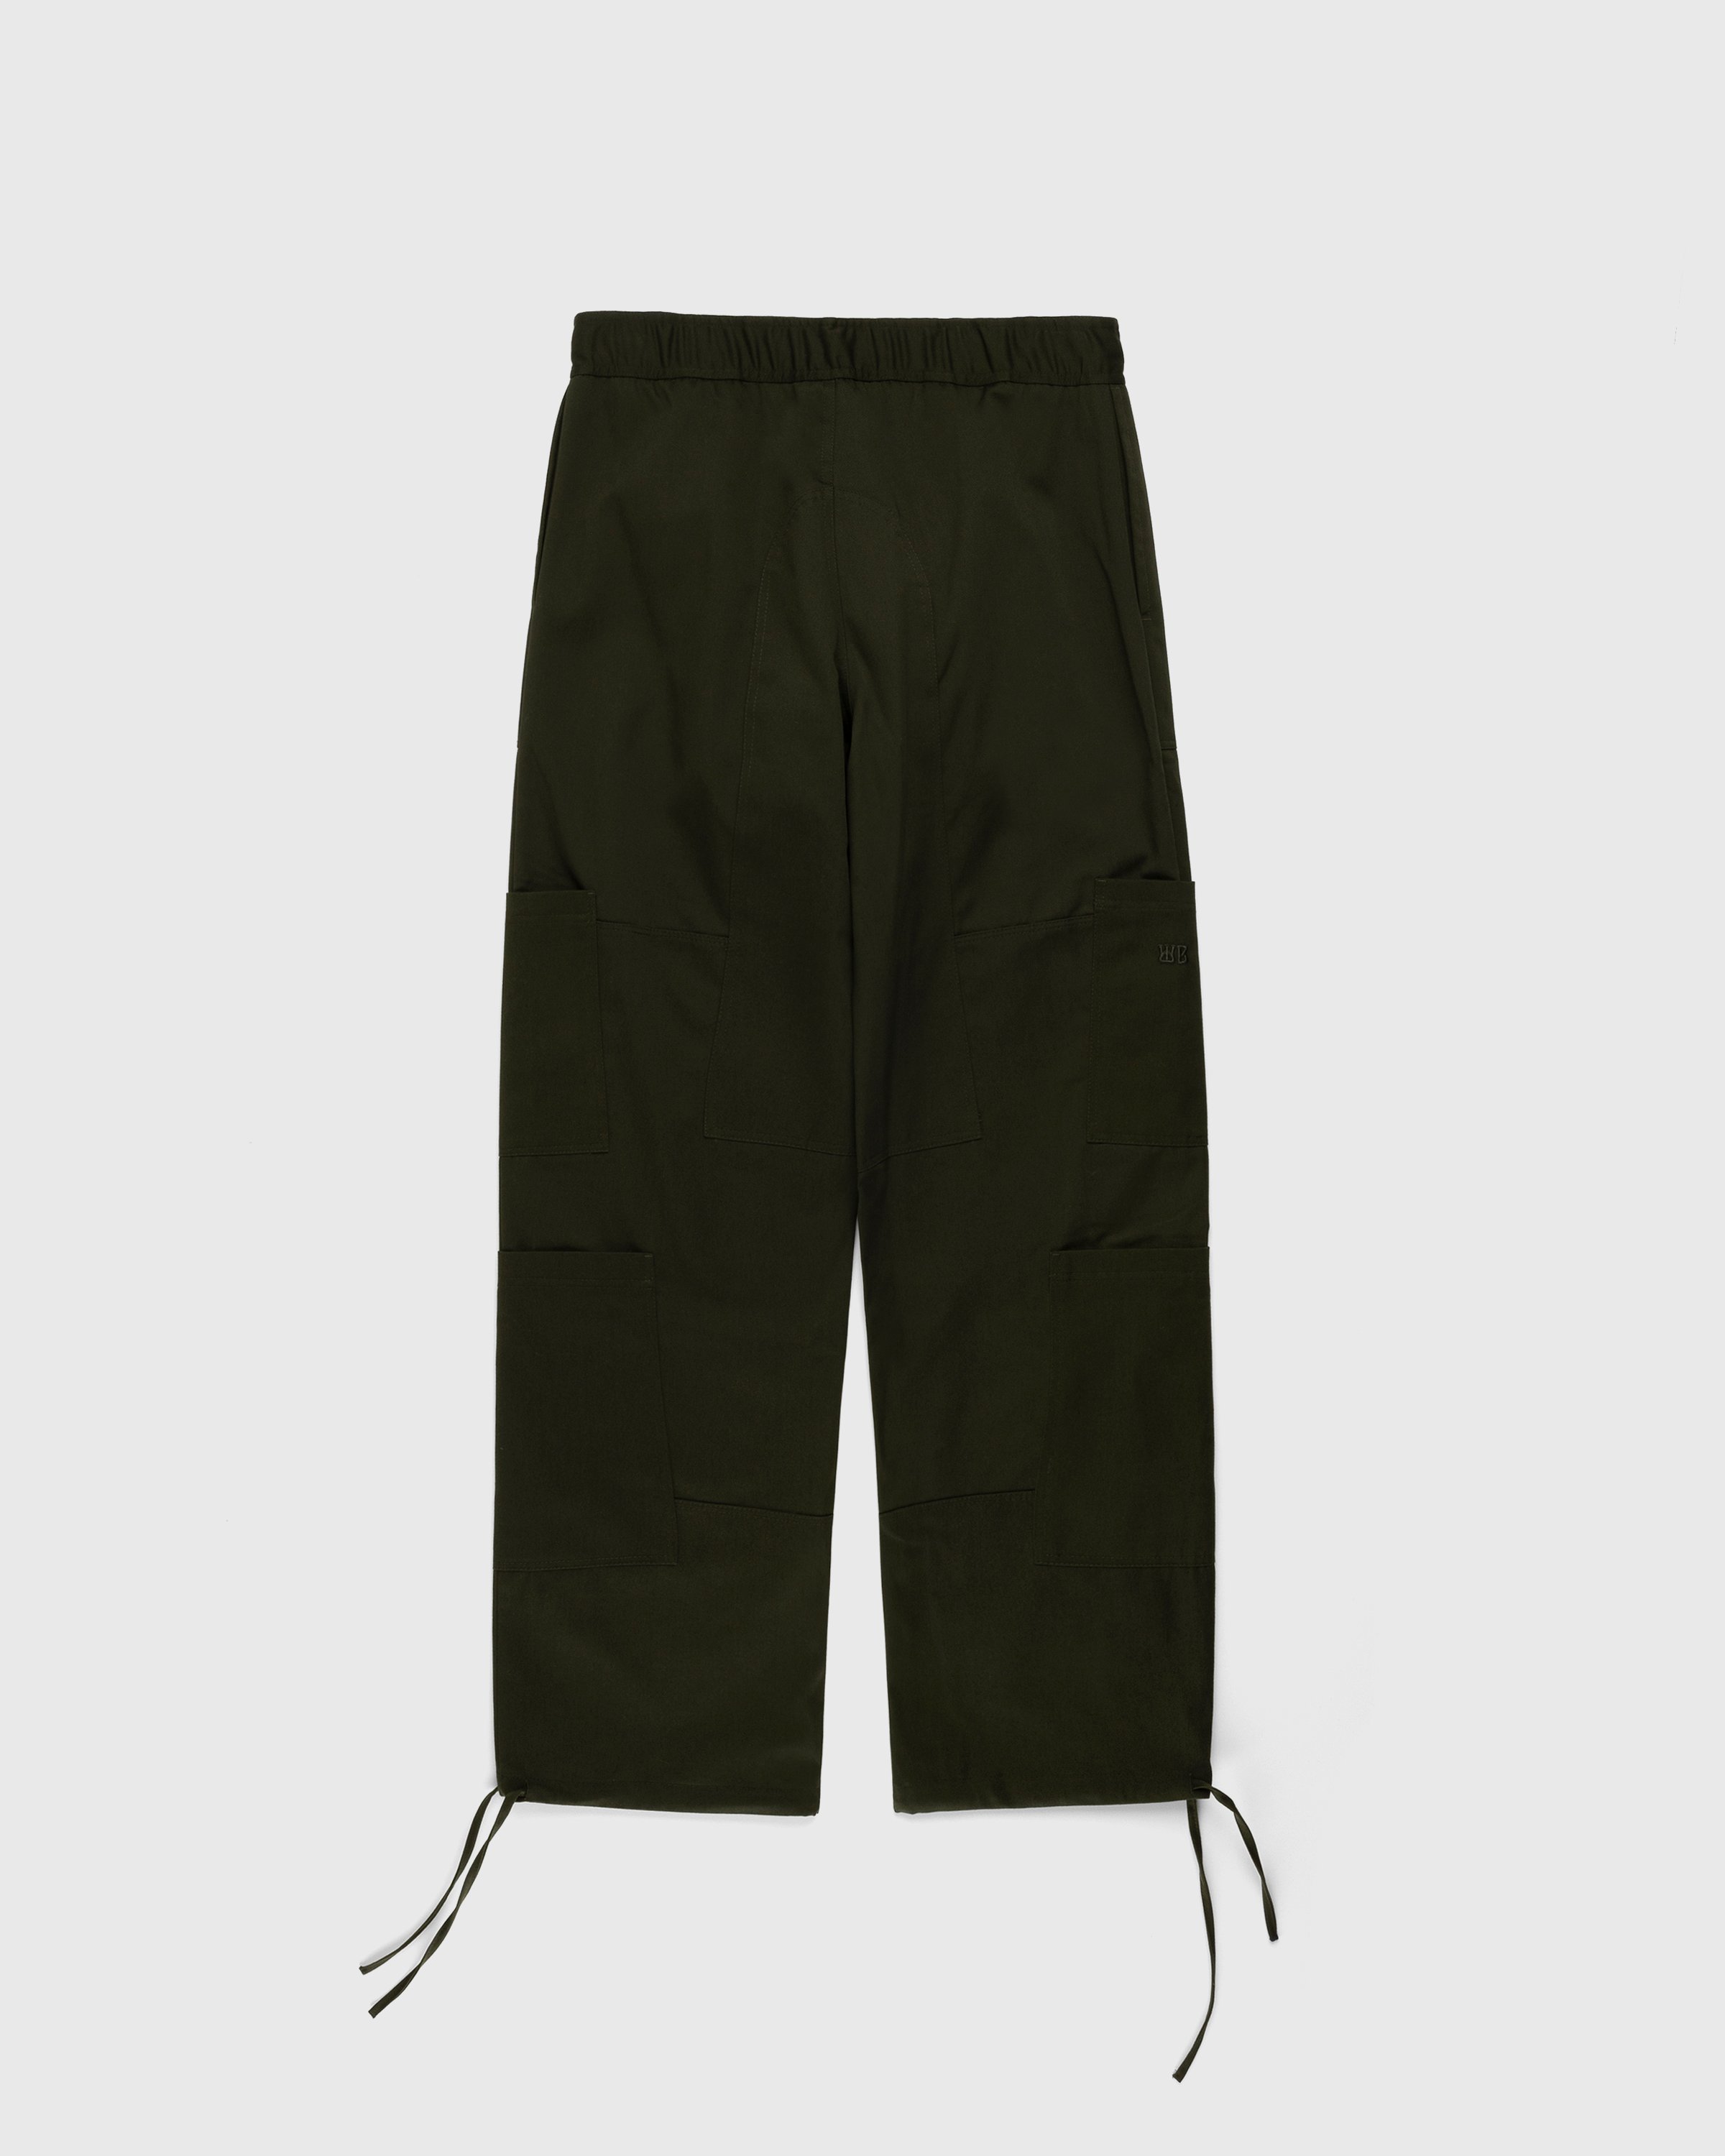 Wales Bonner - Earth Trousers Green - Clothing - Green - Image 2